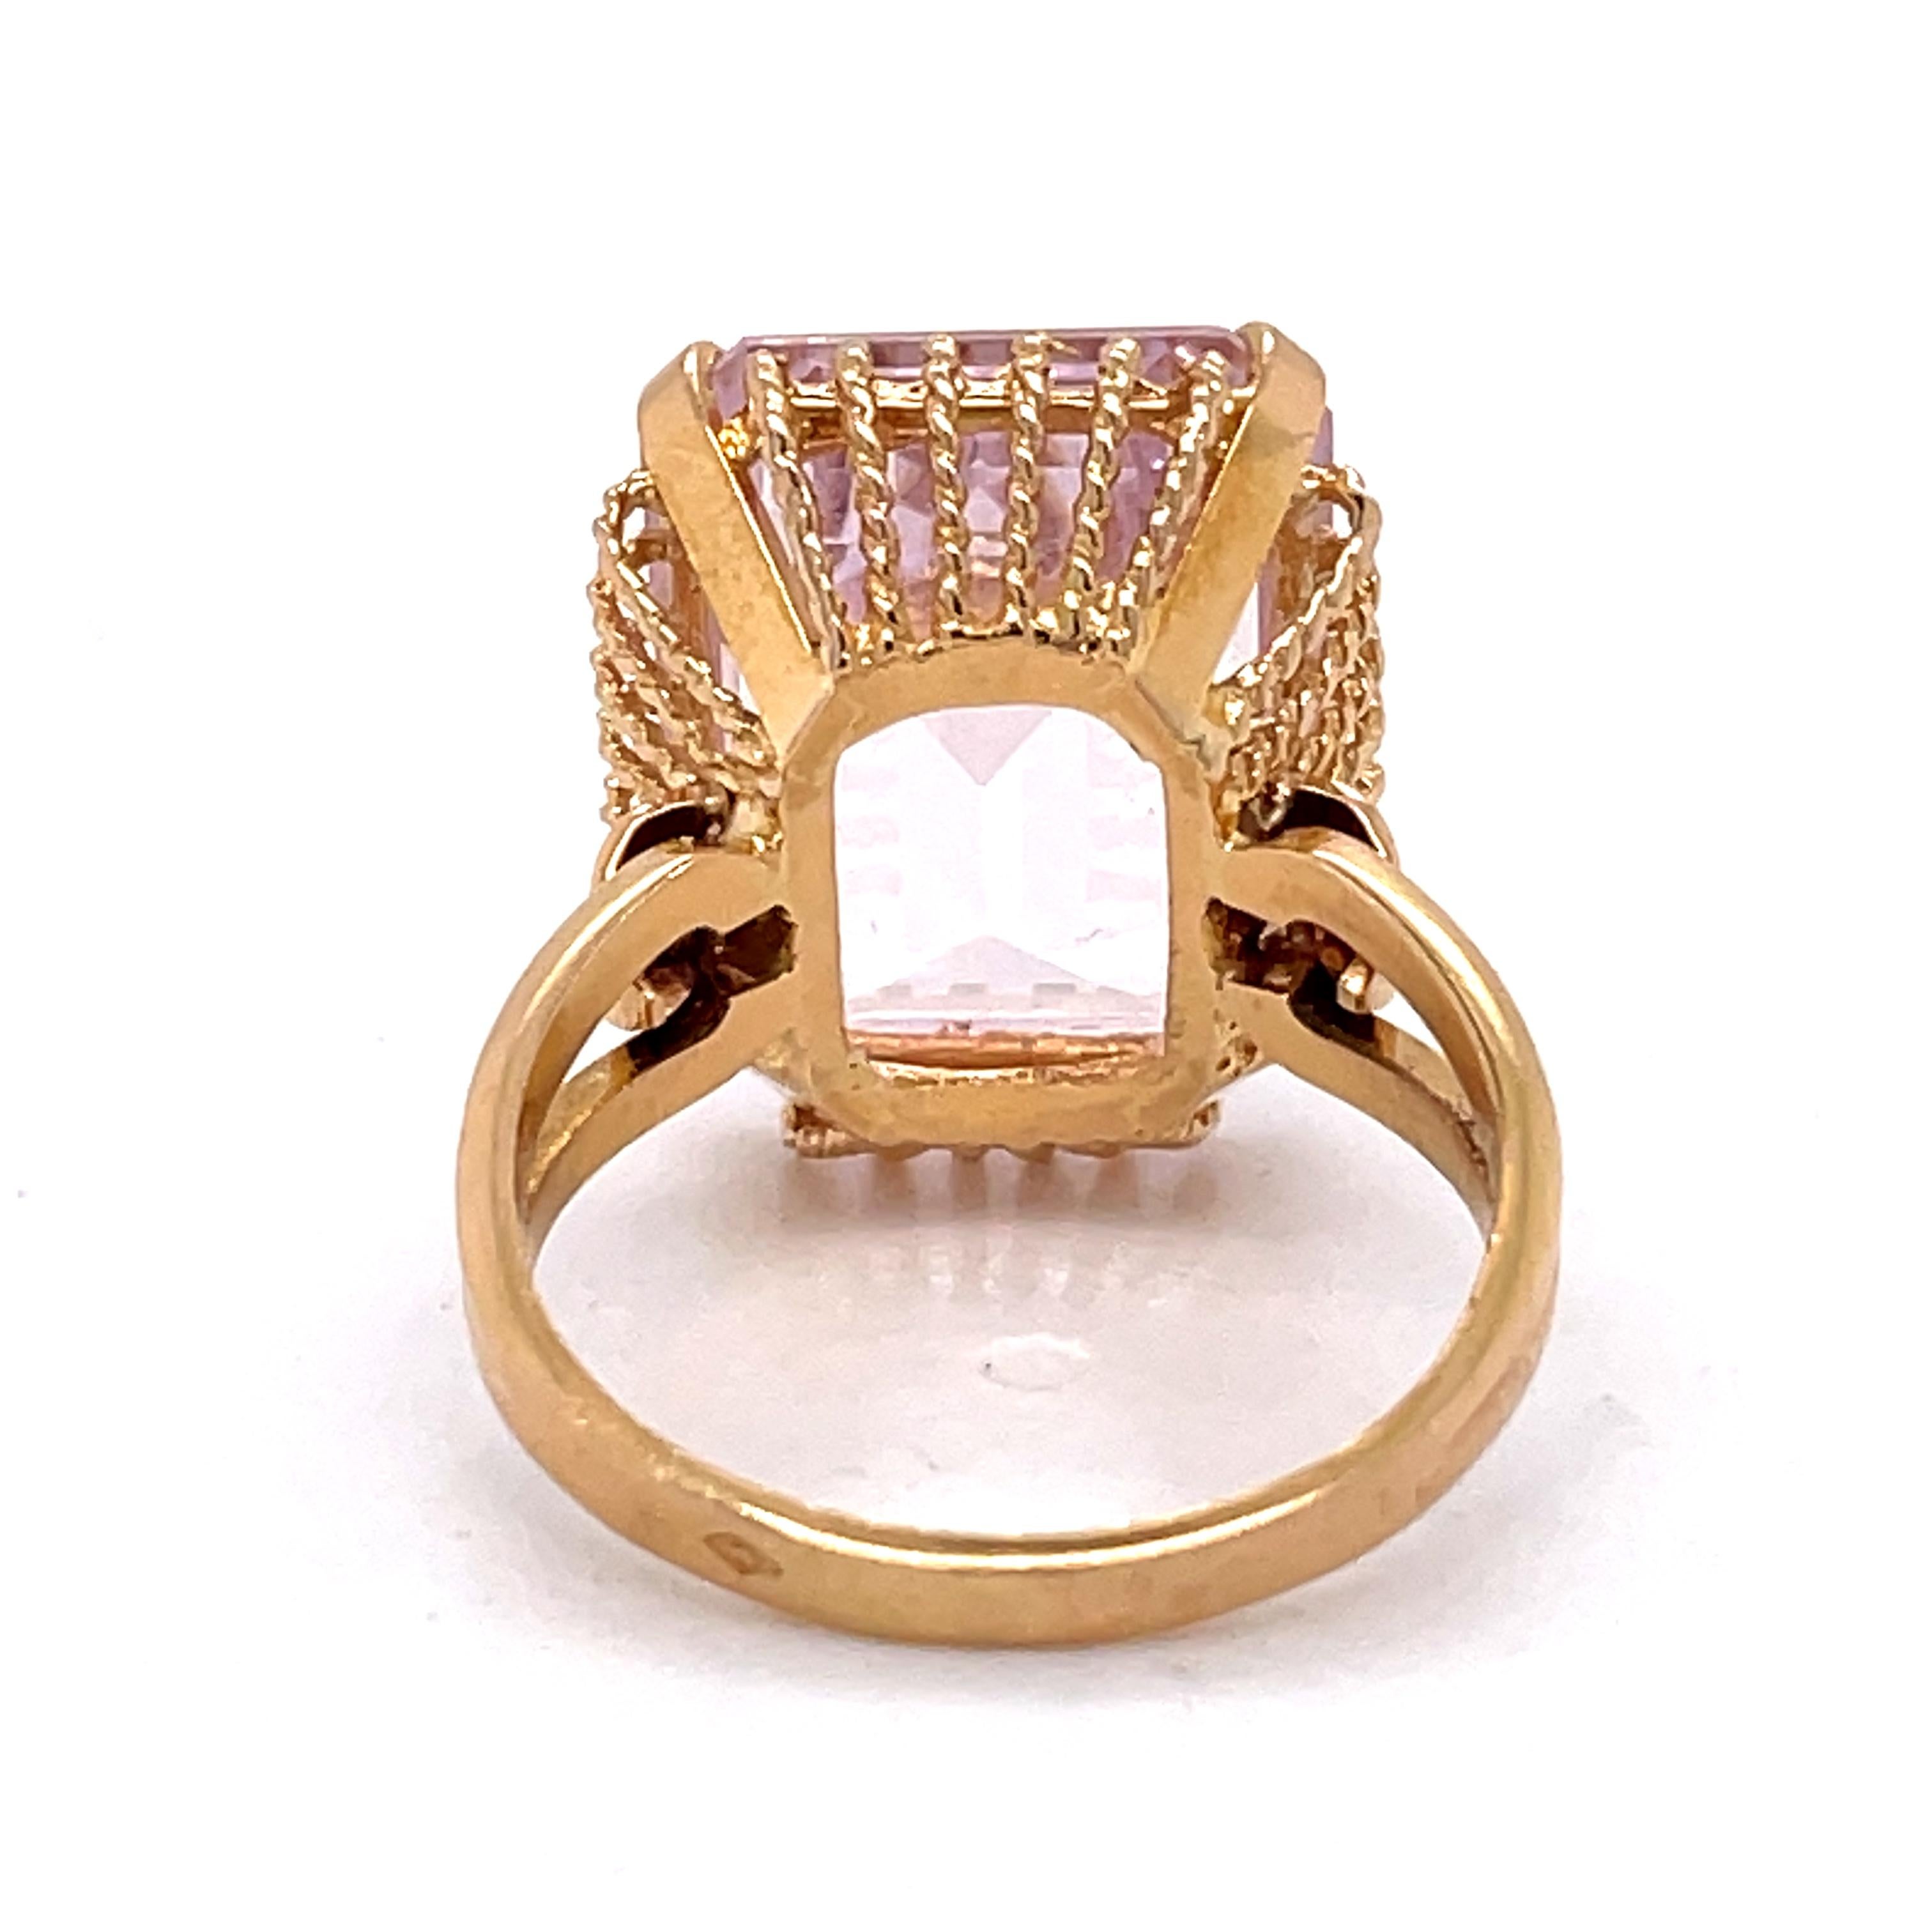 GWLAB Certified, 16.23ct Pink Spinel Emerald Cut, 14k Rose Gold, Cocktail Ring For Sale 1